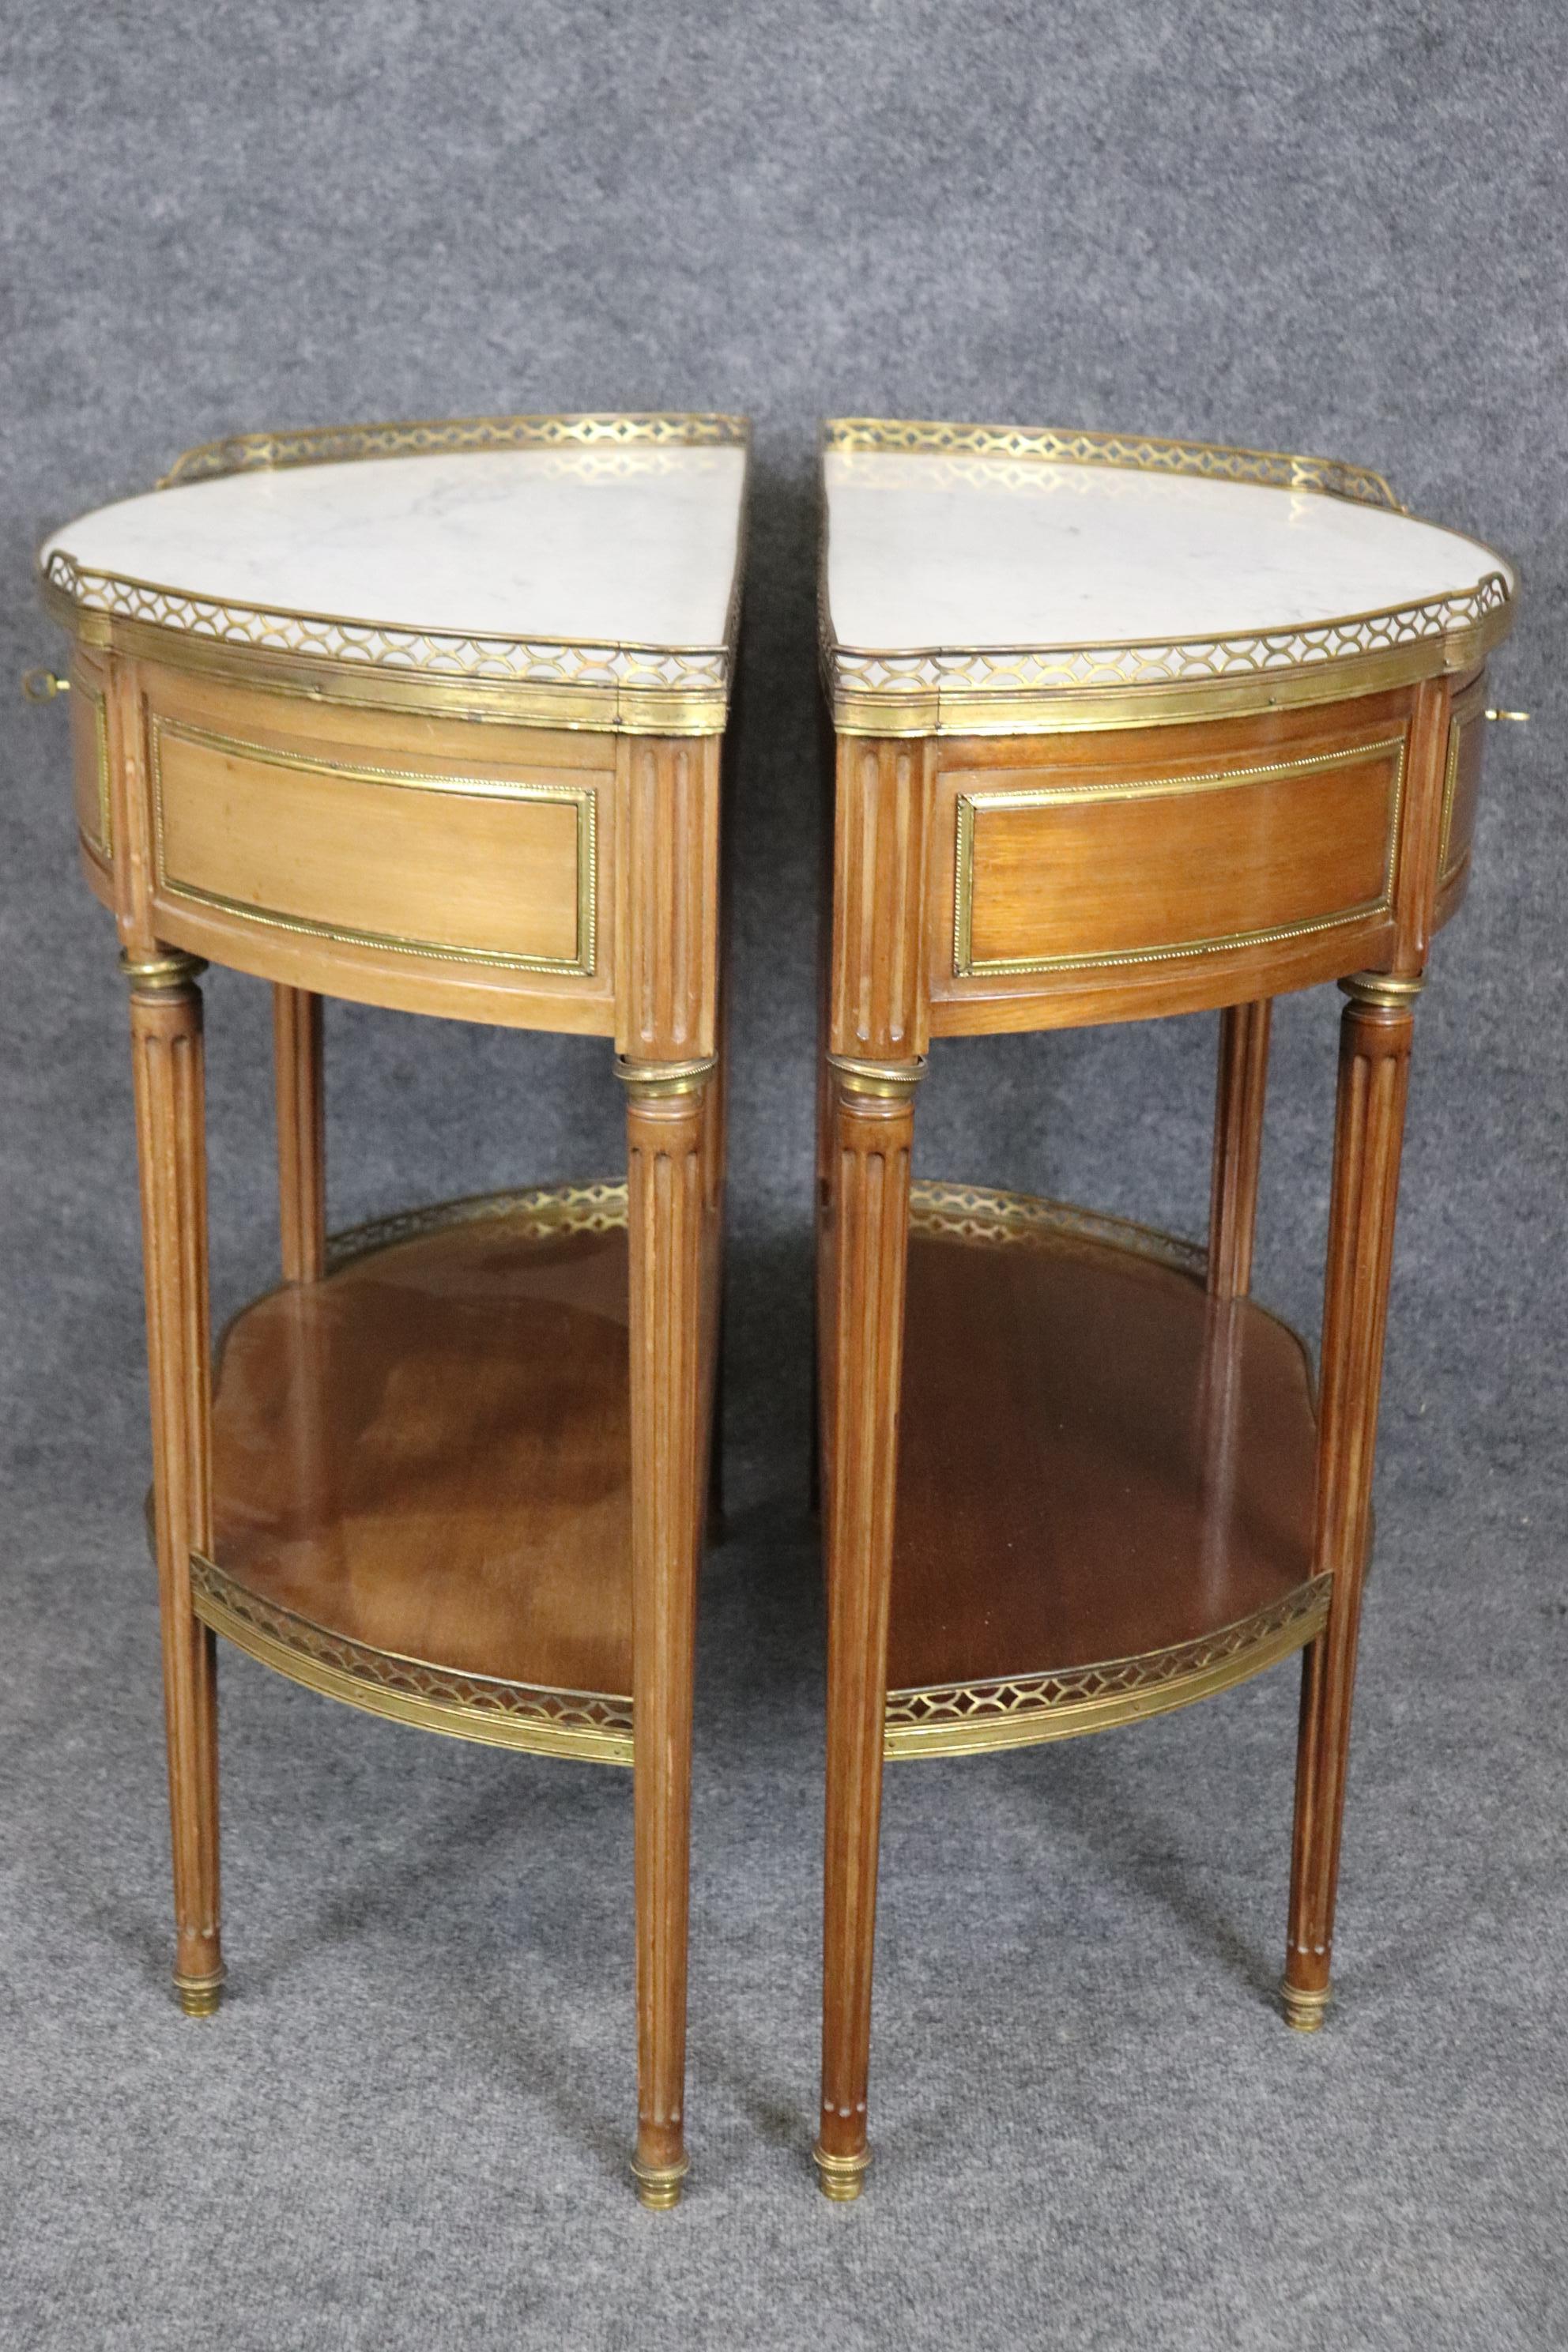  Superb Pair of Marble Top Bronze Mounted French Demilune Console Tables  For Sale 3